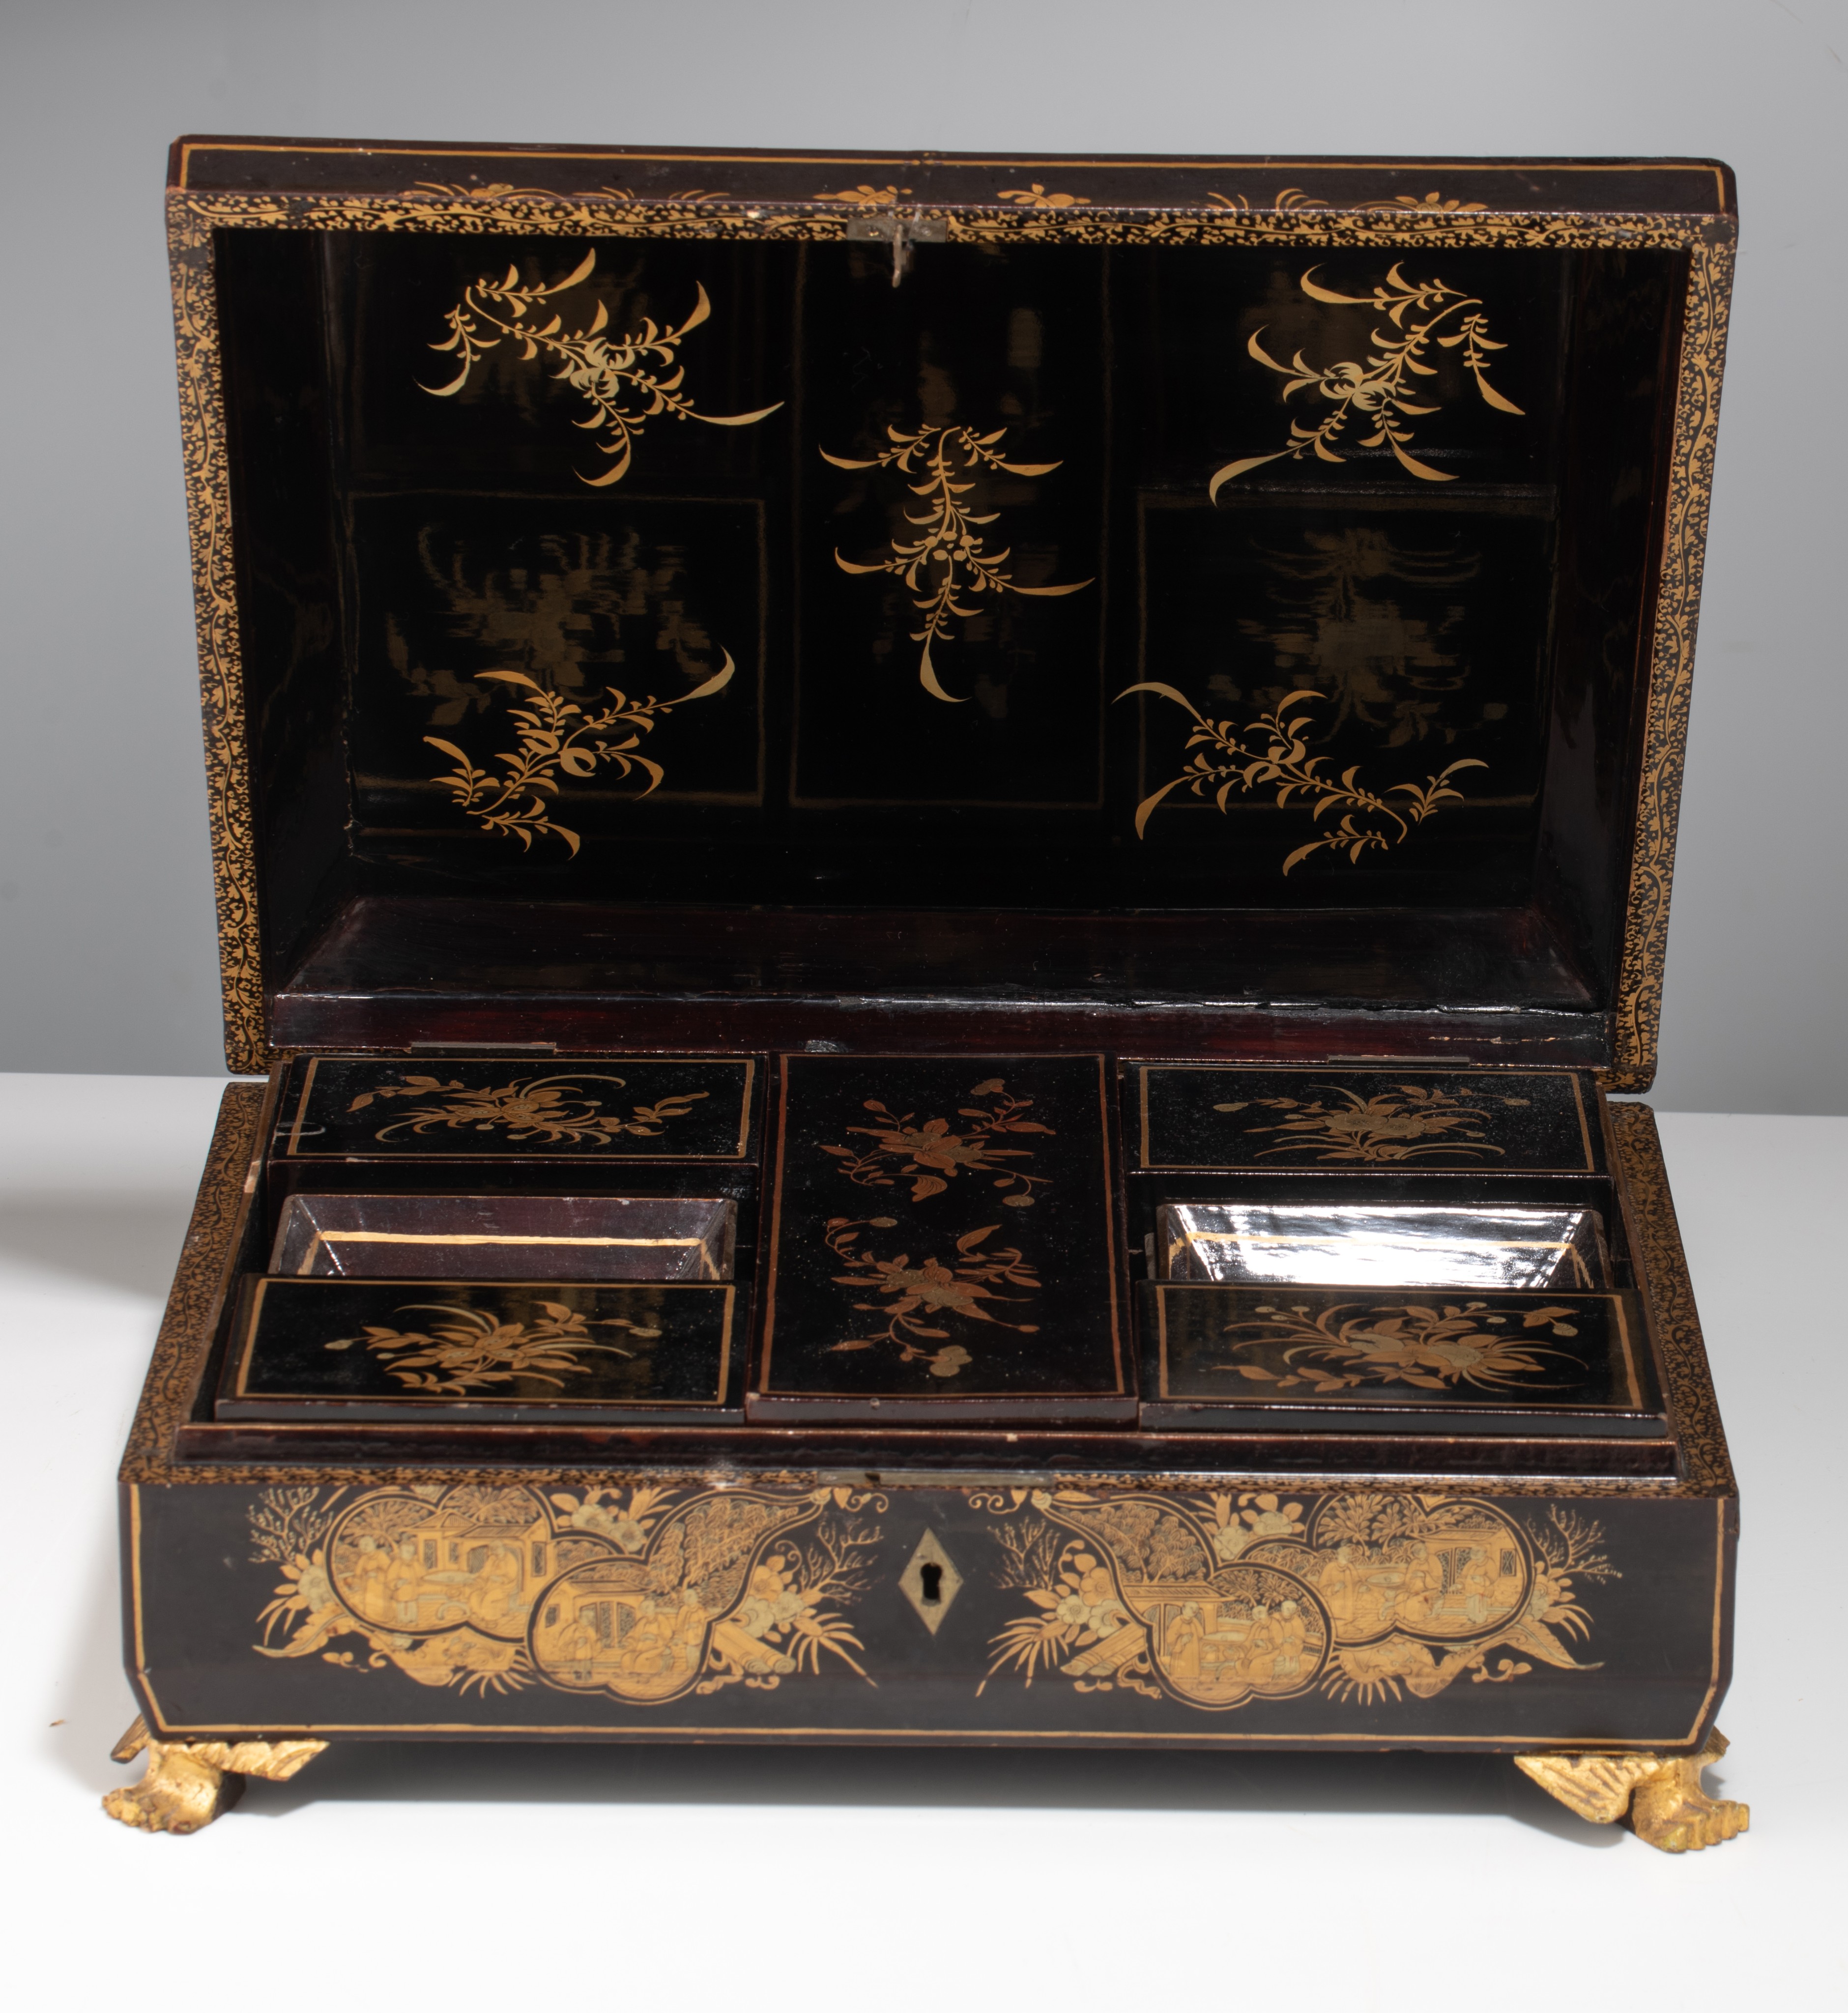 A South-Chinese export gilt and black lacquer game box, 19thC, H 12 - 35 x 30 cm - Image 2 of 10